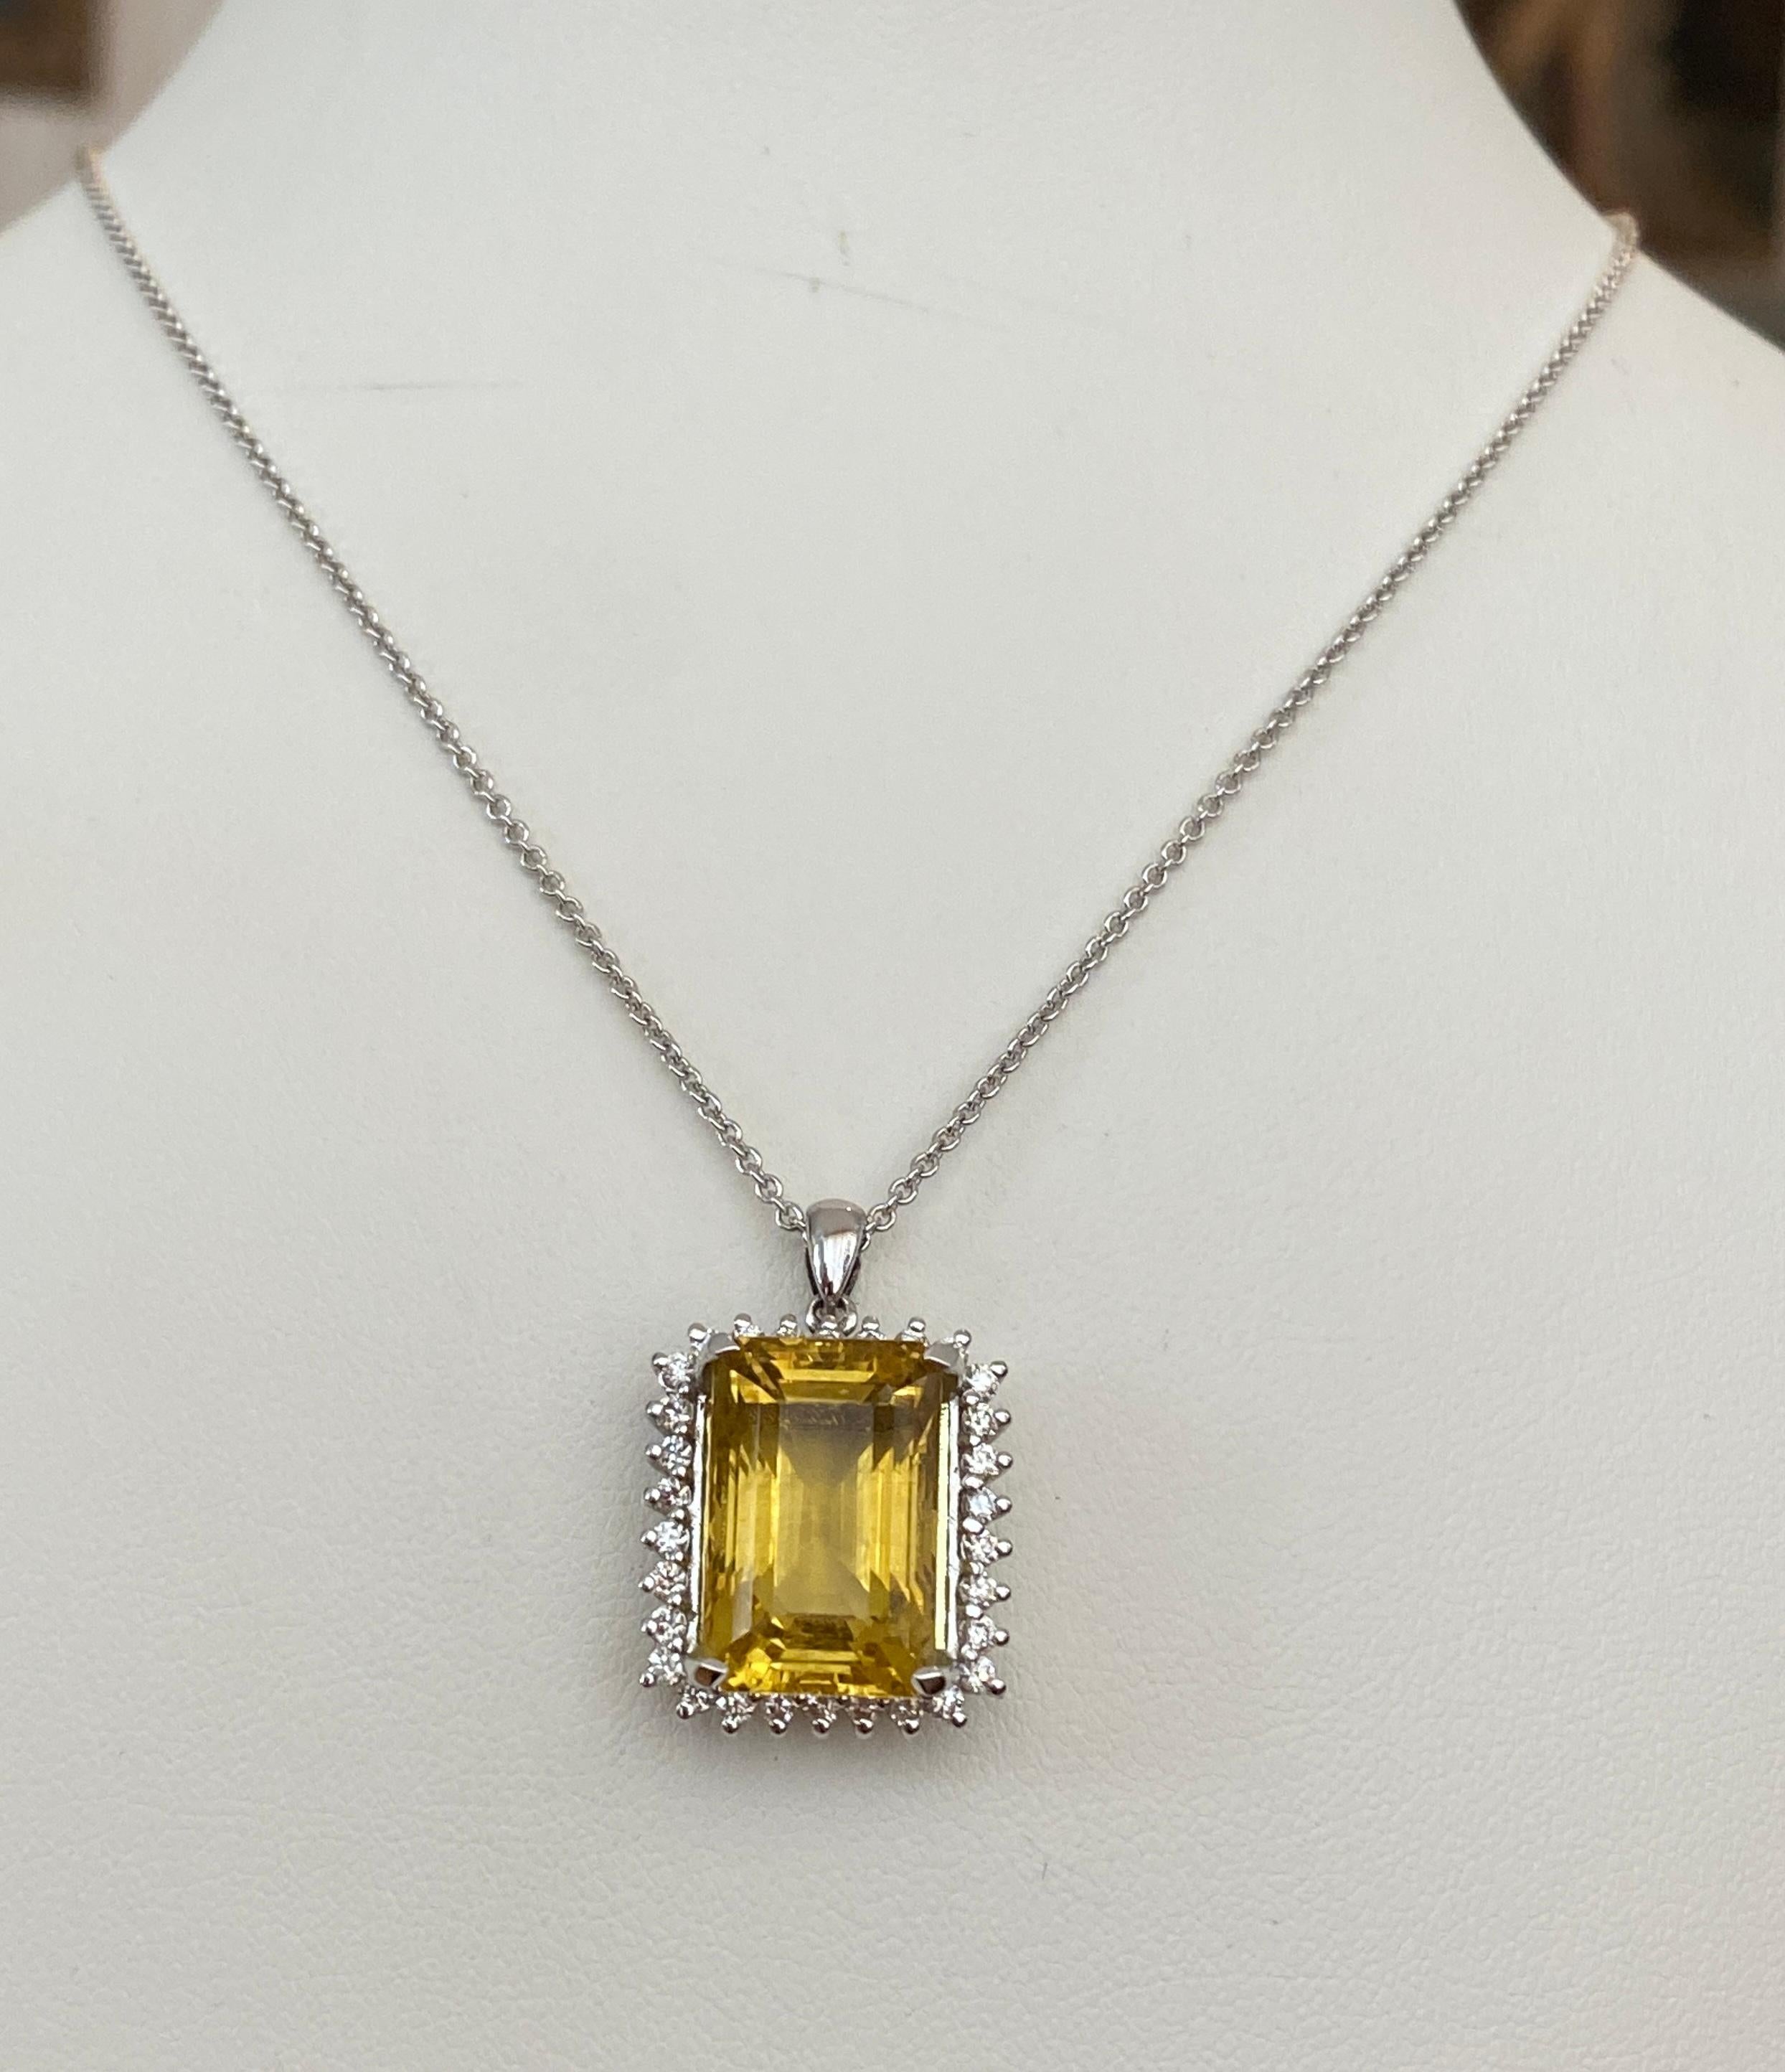 Offered 18 kt white gold necklace with a pendant decorated with emerald cut citrine, approx. 9 ct. Surrounded by an entourage of 30 pieces of brilliant cut diamonds approx. 0.55 ct of the quality H/VS/SI. Grade: necklace and pendant 750 (marked).